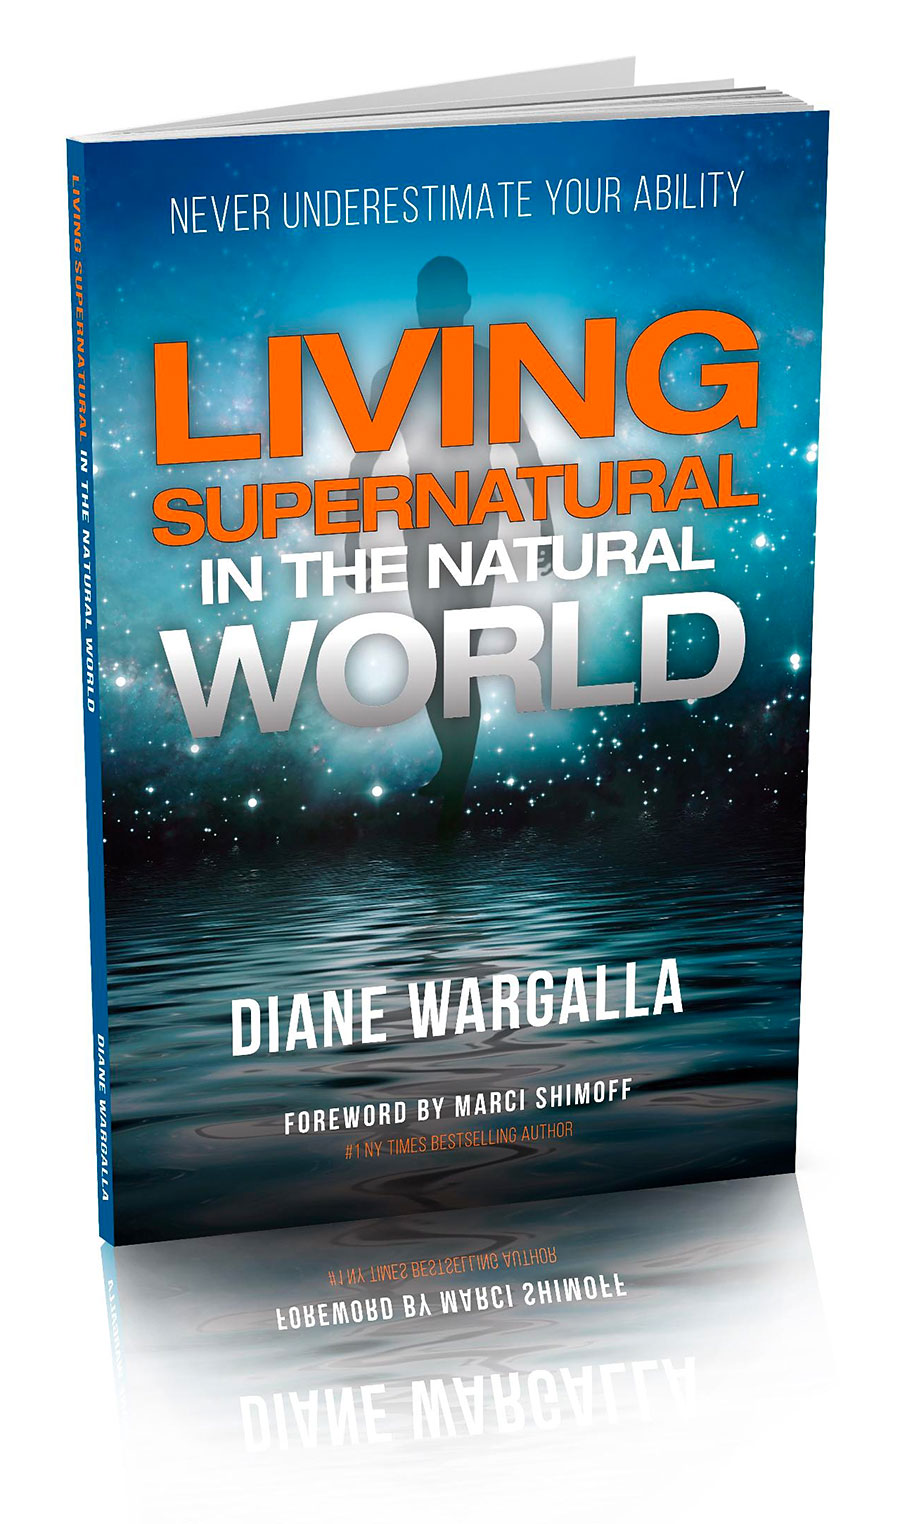 Living Supernatural in the Natural World: Never Underestimate Your Ability